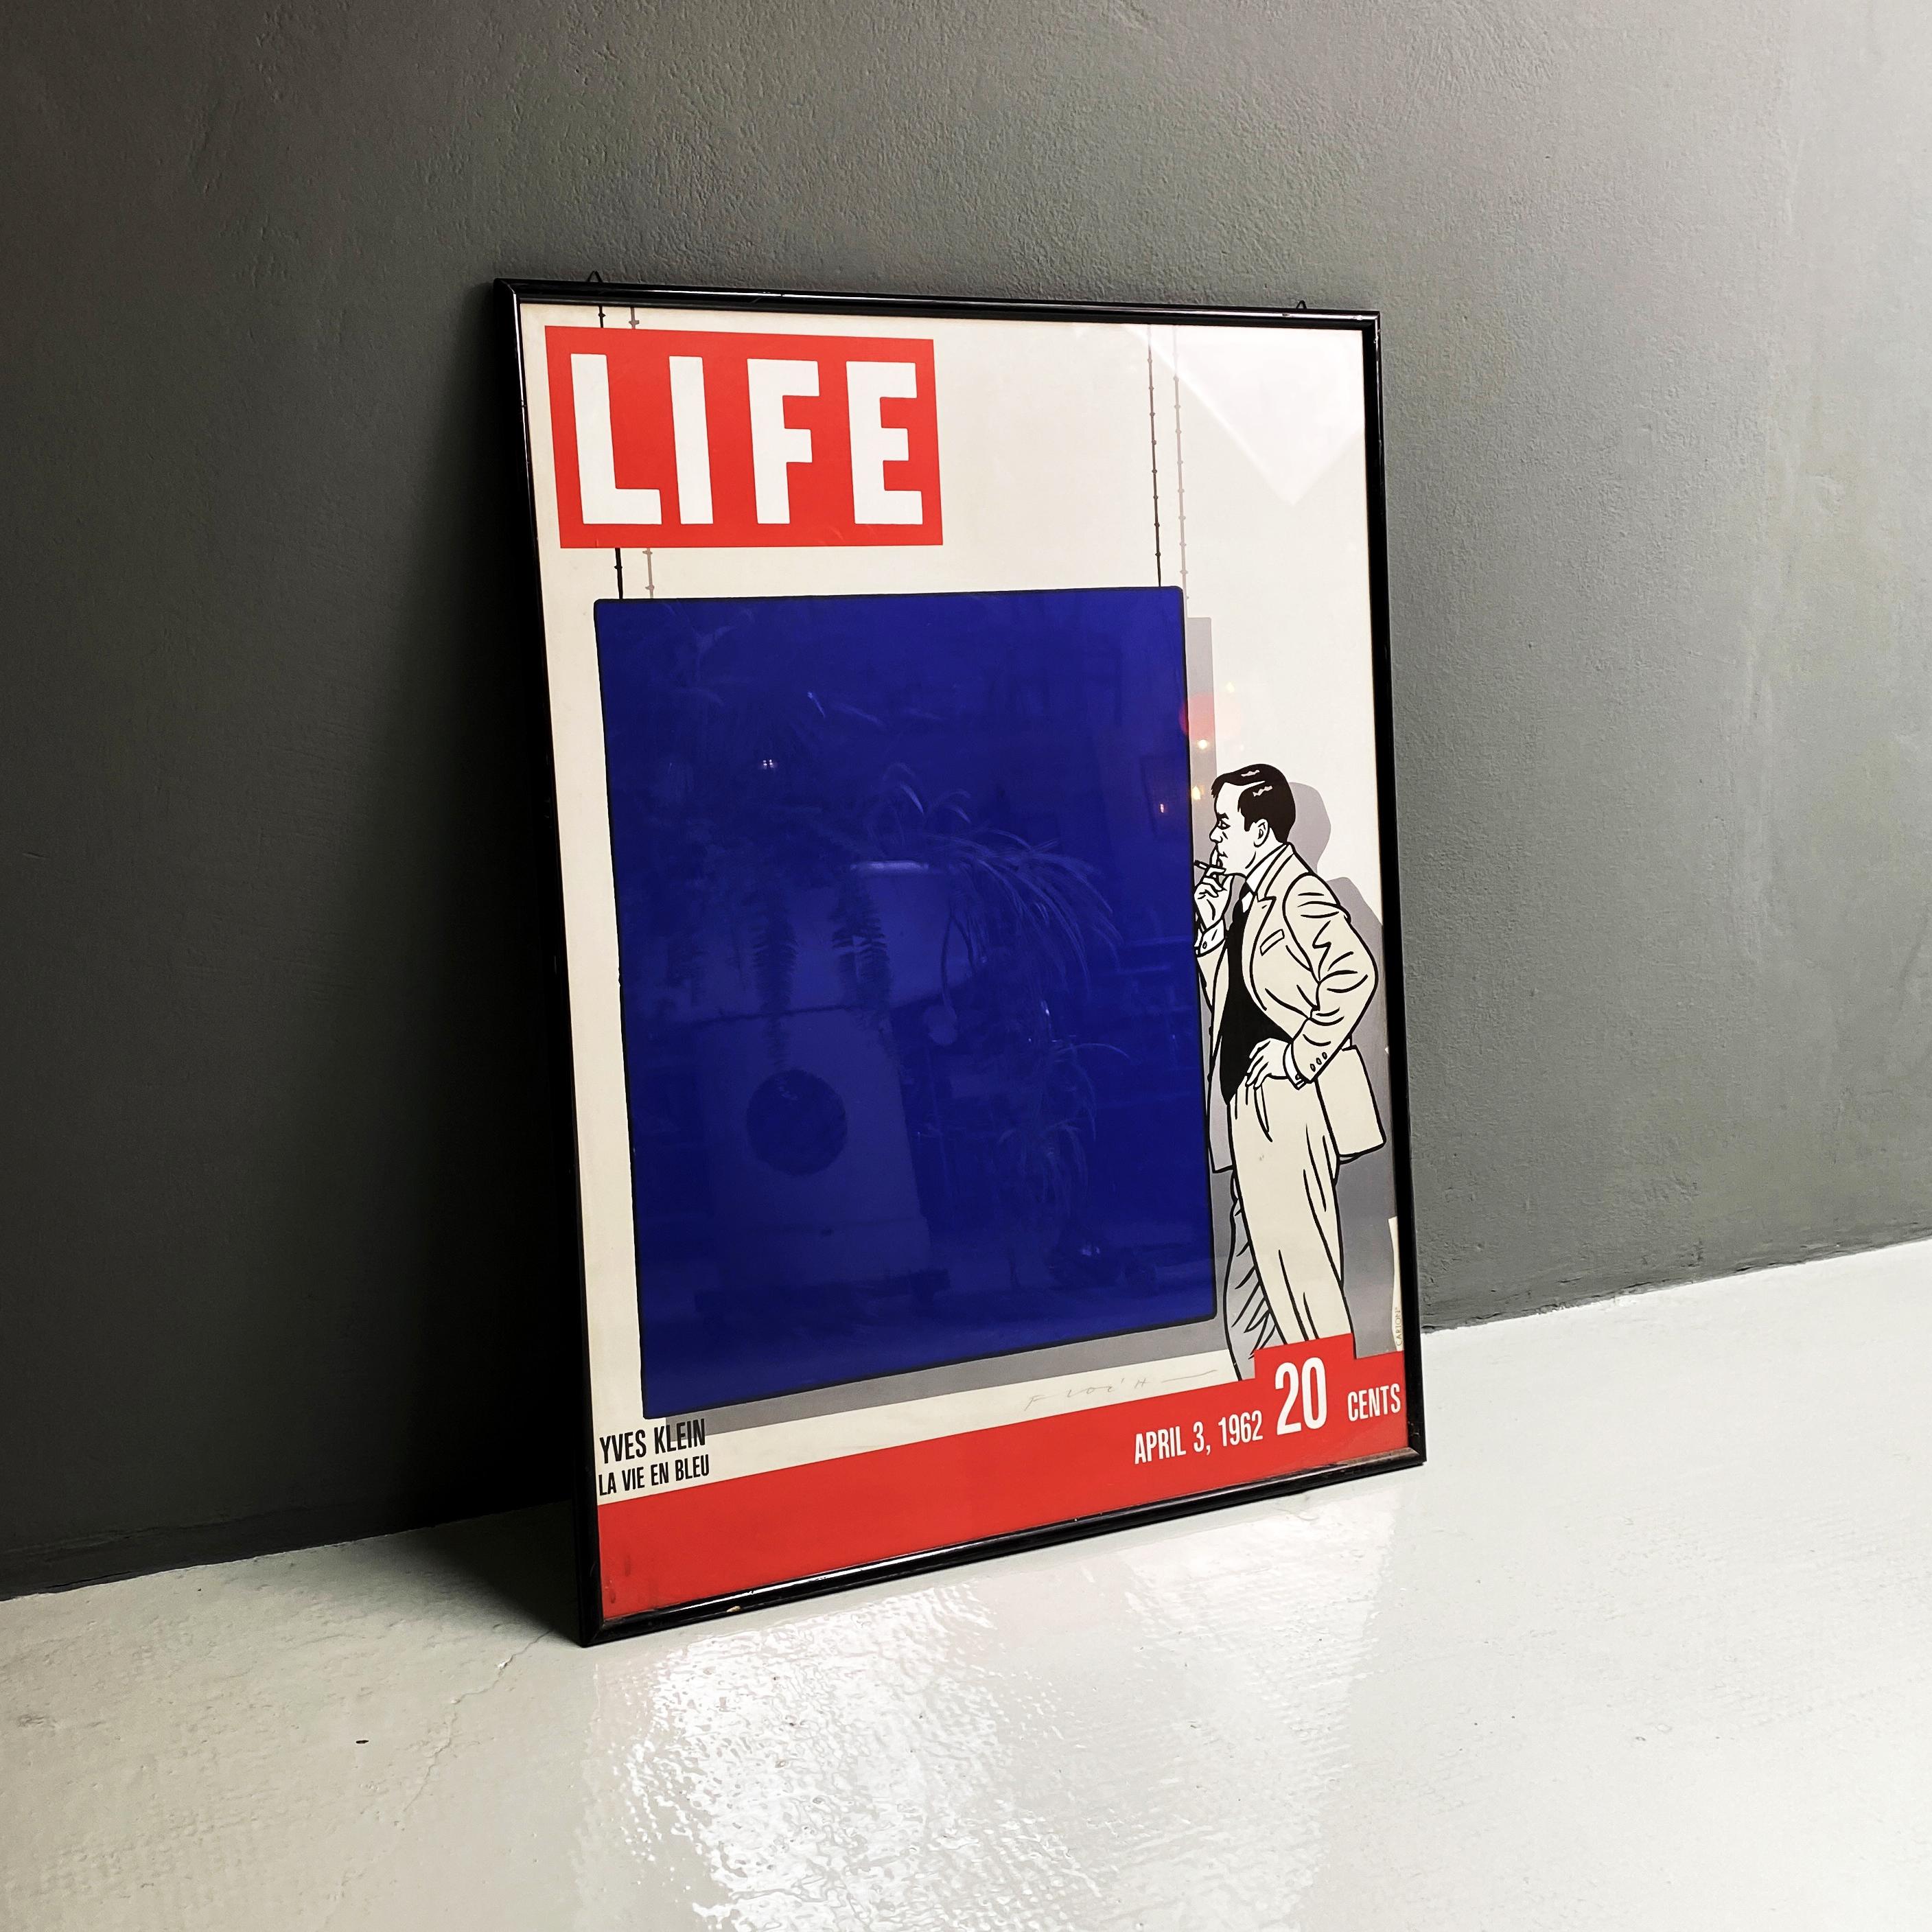 Life magazine poster, 1962
Framed poster of the 1962 cover of Life magazine dedicated to Yves Klein.

Good conditions

Measurements in cm 68x2x92h.